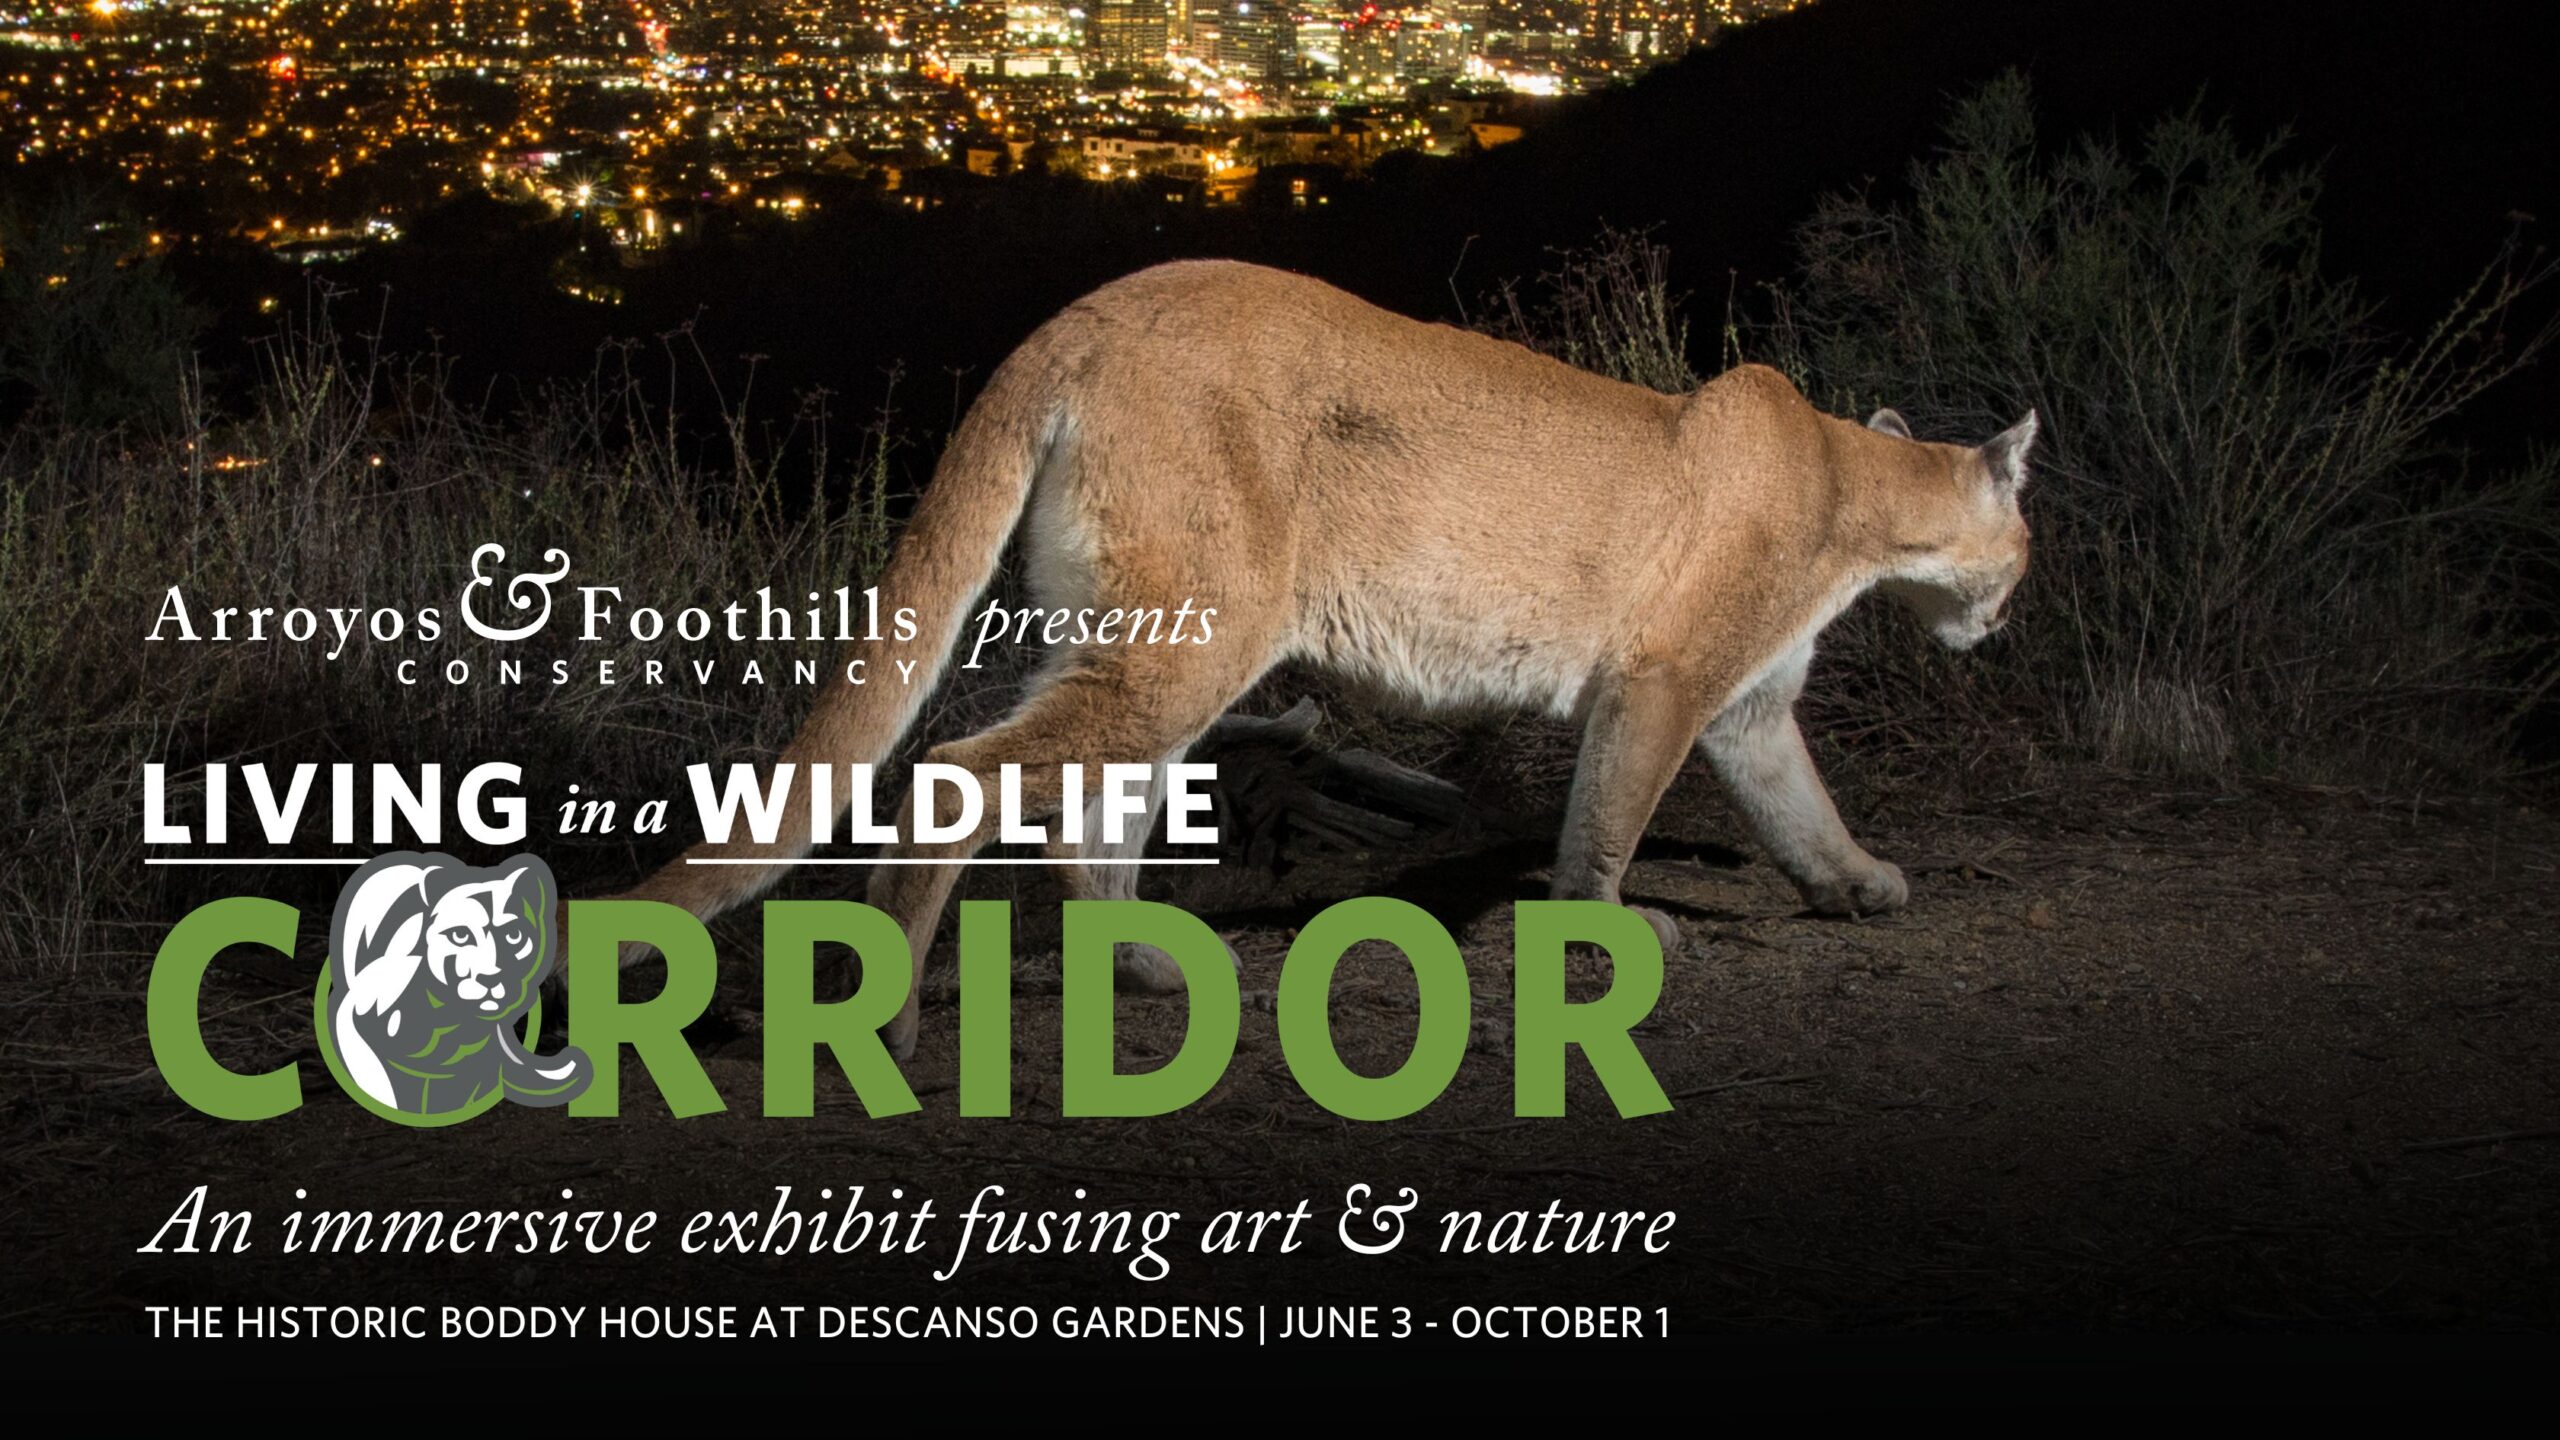 Image of a mountain lion walking with city lights behind it. Text overlayed that reads Arroyos & Foothills presents Living in a Wildlife Corridor, an immersive exhibit fusing art and nature open at Descanso Gardens from June 3rd to October 1st.